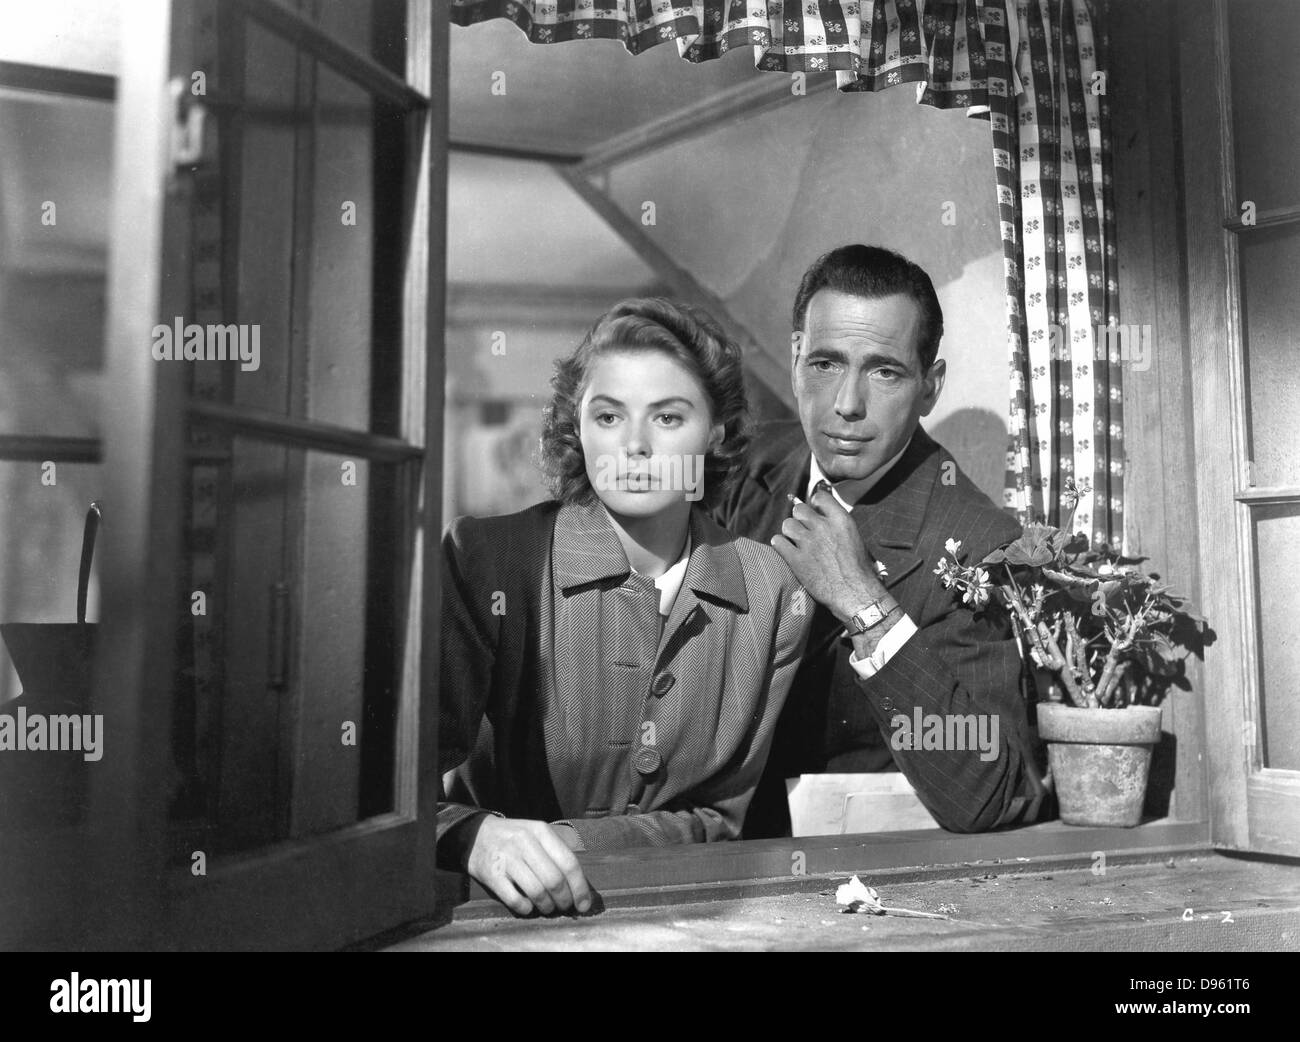 Ingrid Bergman (1917-1982) Swedish film and stage actress, with Humphrey Bogart (1899-1957). Still from 'Casablanca', 1942. Based on the play 'Everybody Goes to Rick's' by Murray Burnett and Joan Alison. Stock Photo